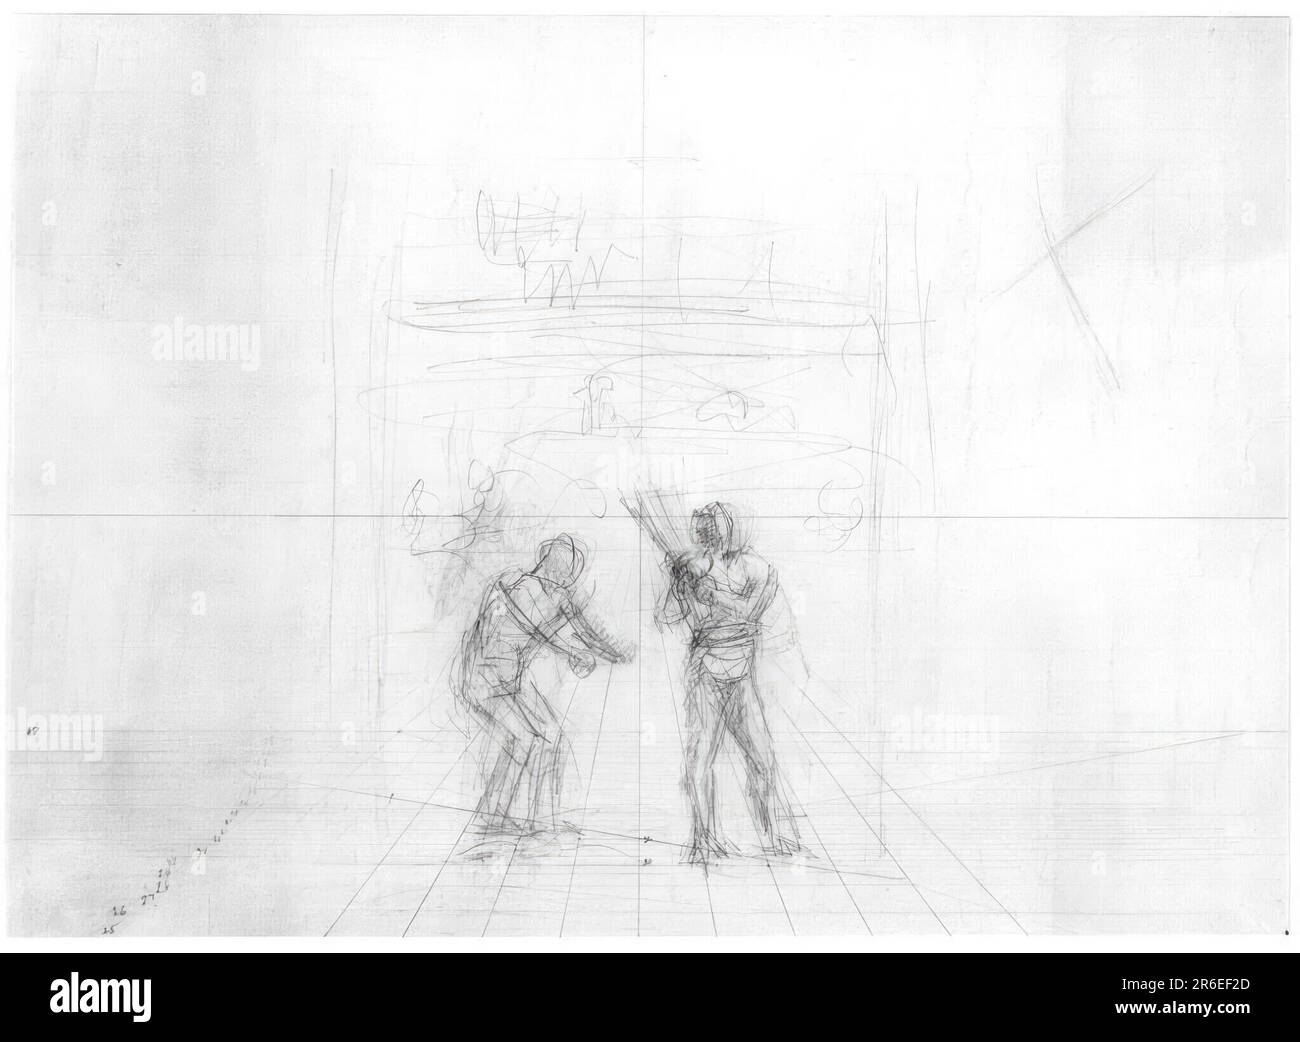 (Untitled) (Perspective Study Of Baseball Players). pencil on paper. Date: (c. 1875). Museum: HIRSHHORN MUSEUM AND SCULPTURE GARDEN. Stock Photo